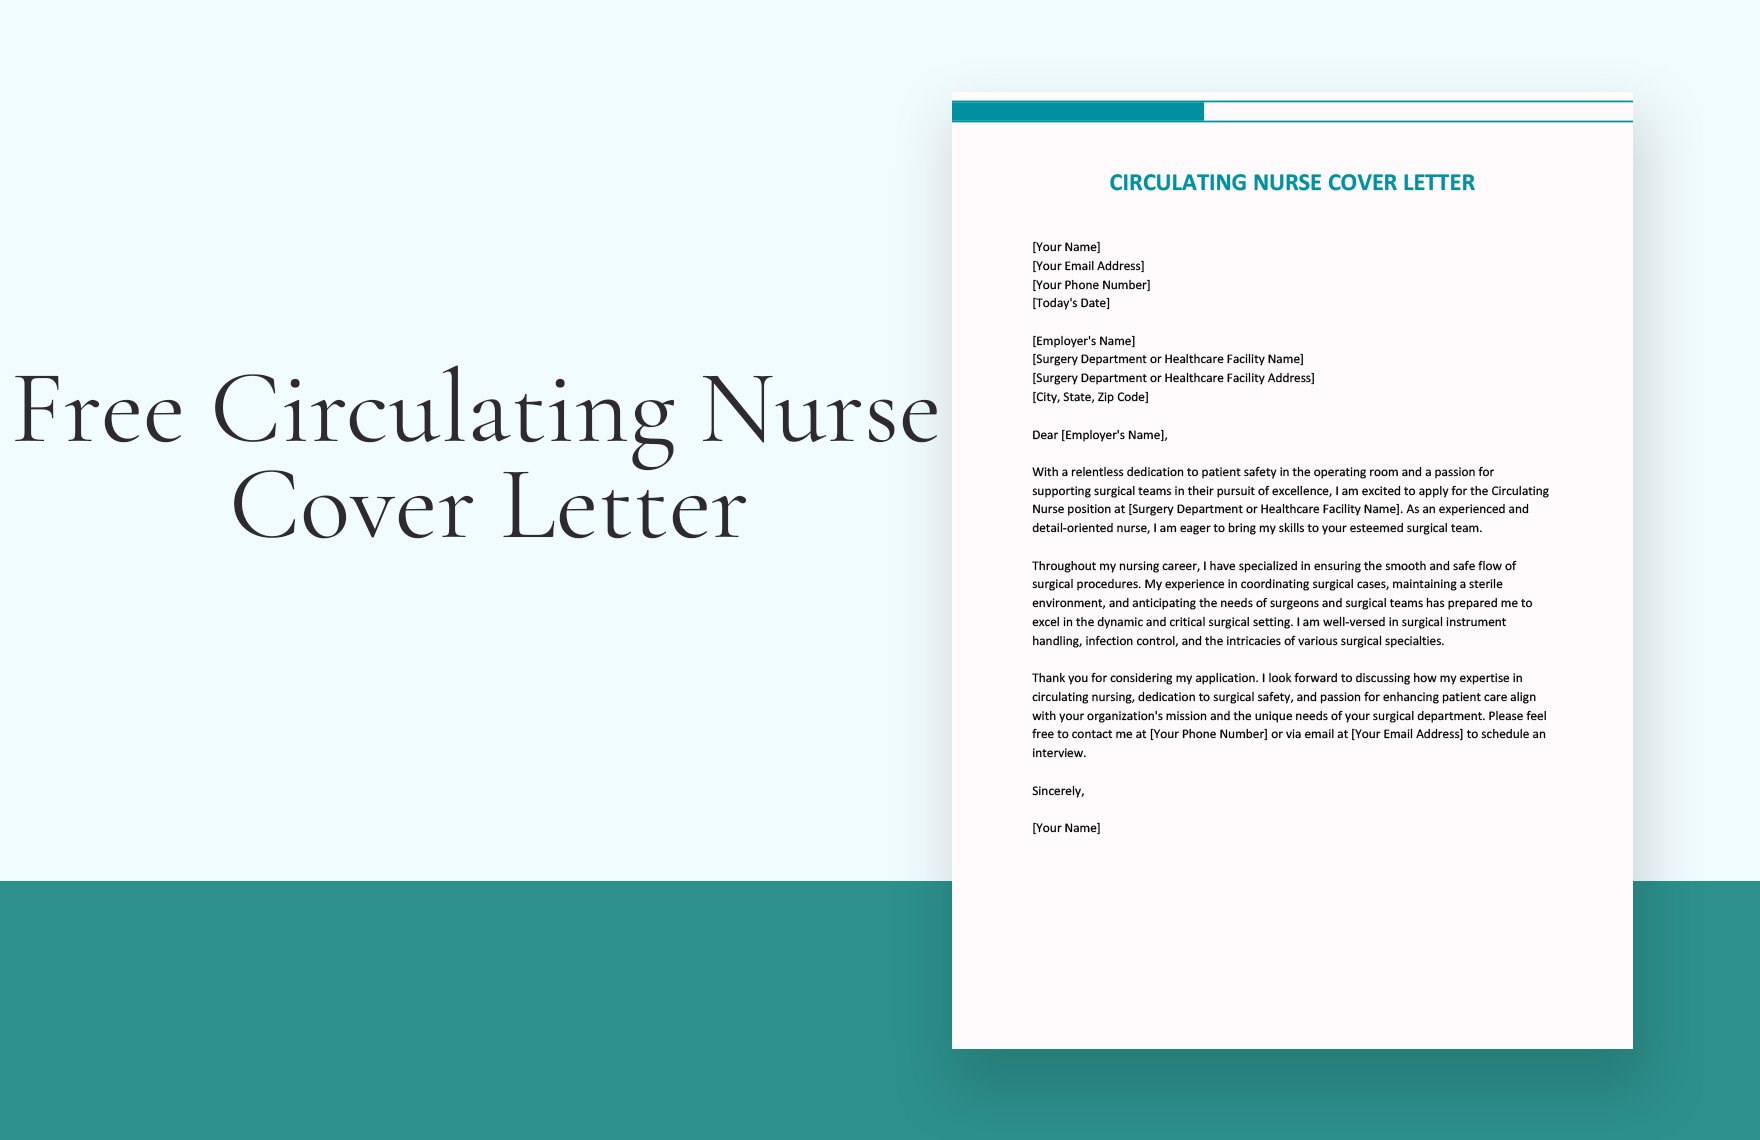 Circulating Nurse Cover Letter in Word, Google Docs